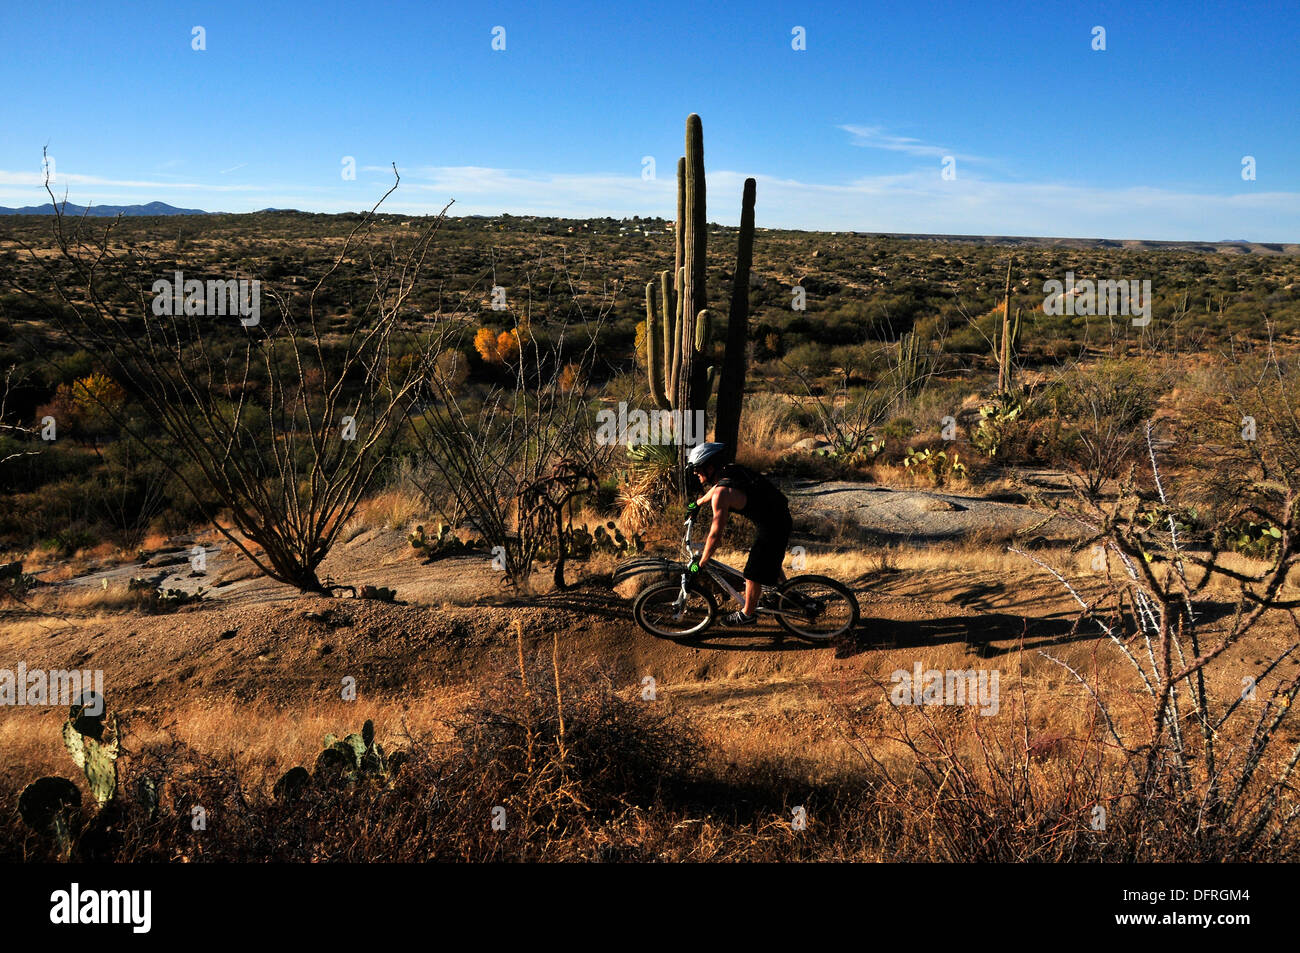 A cyclist rides a mountain bike on the 50 Year Trail on State Trust Land in the Sonoran Desert, Catalina, Arizona, USA. Stock Photo